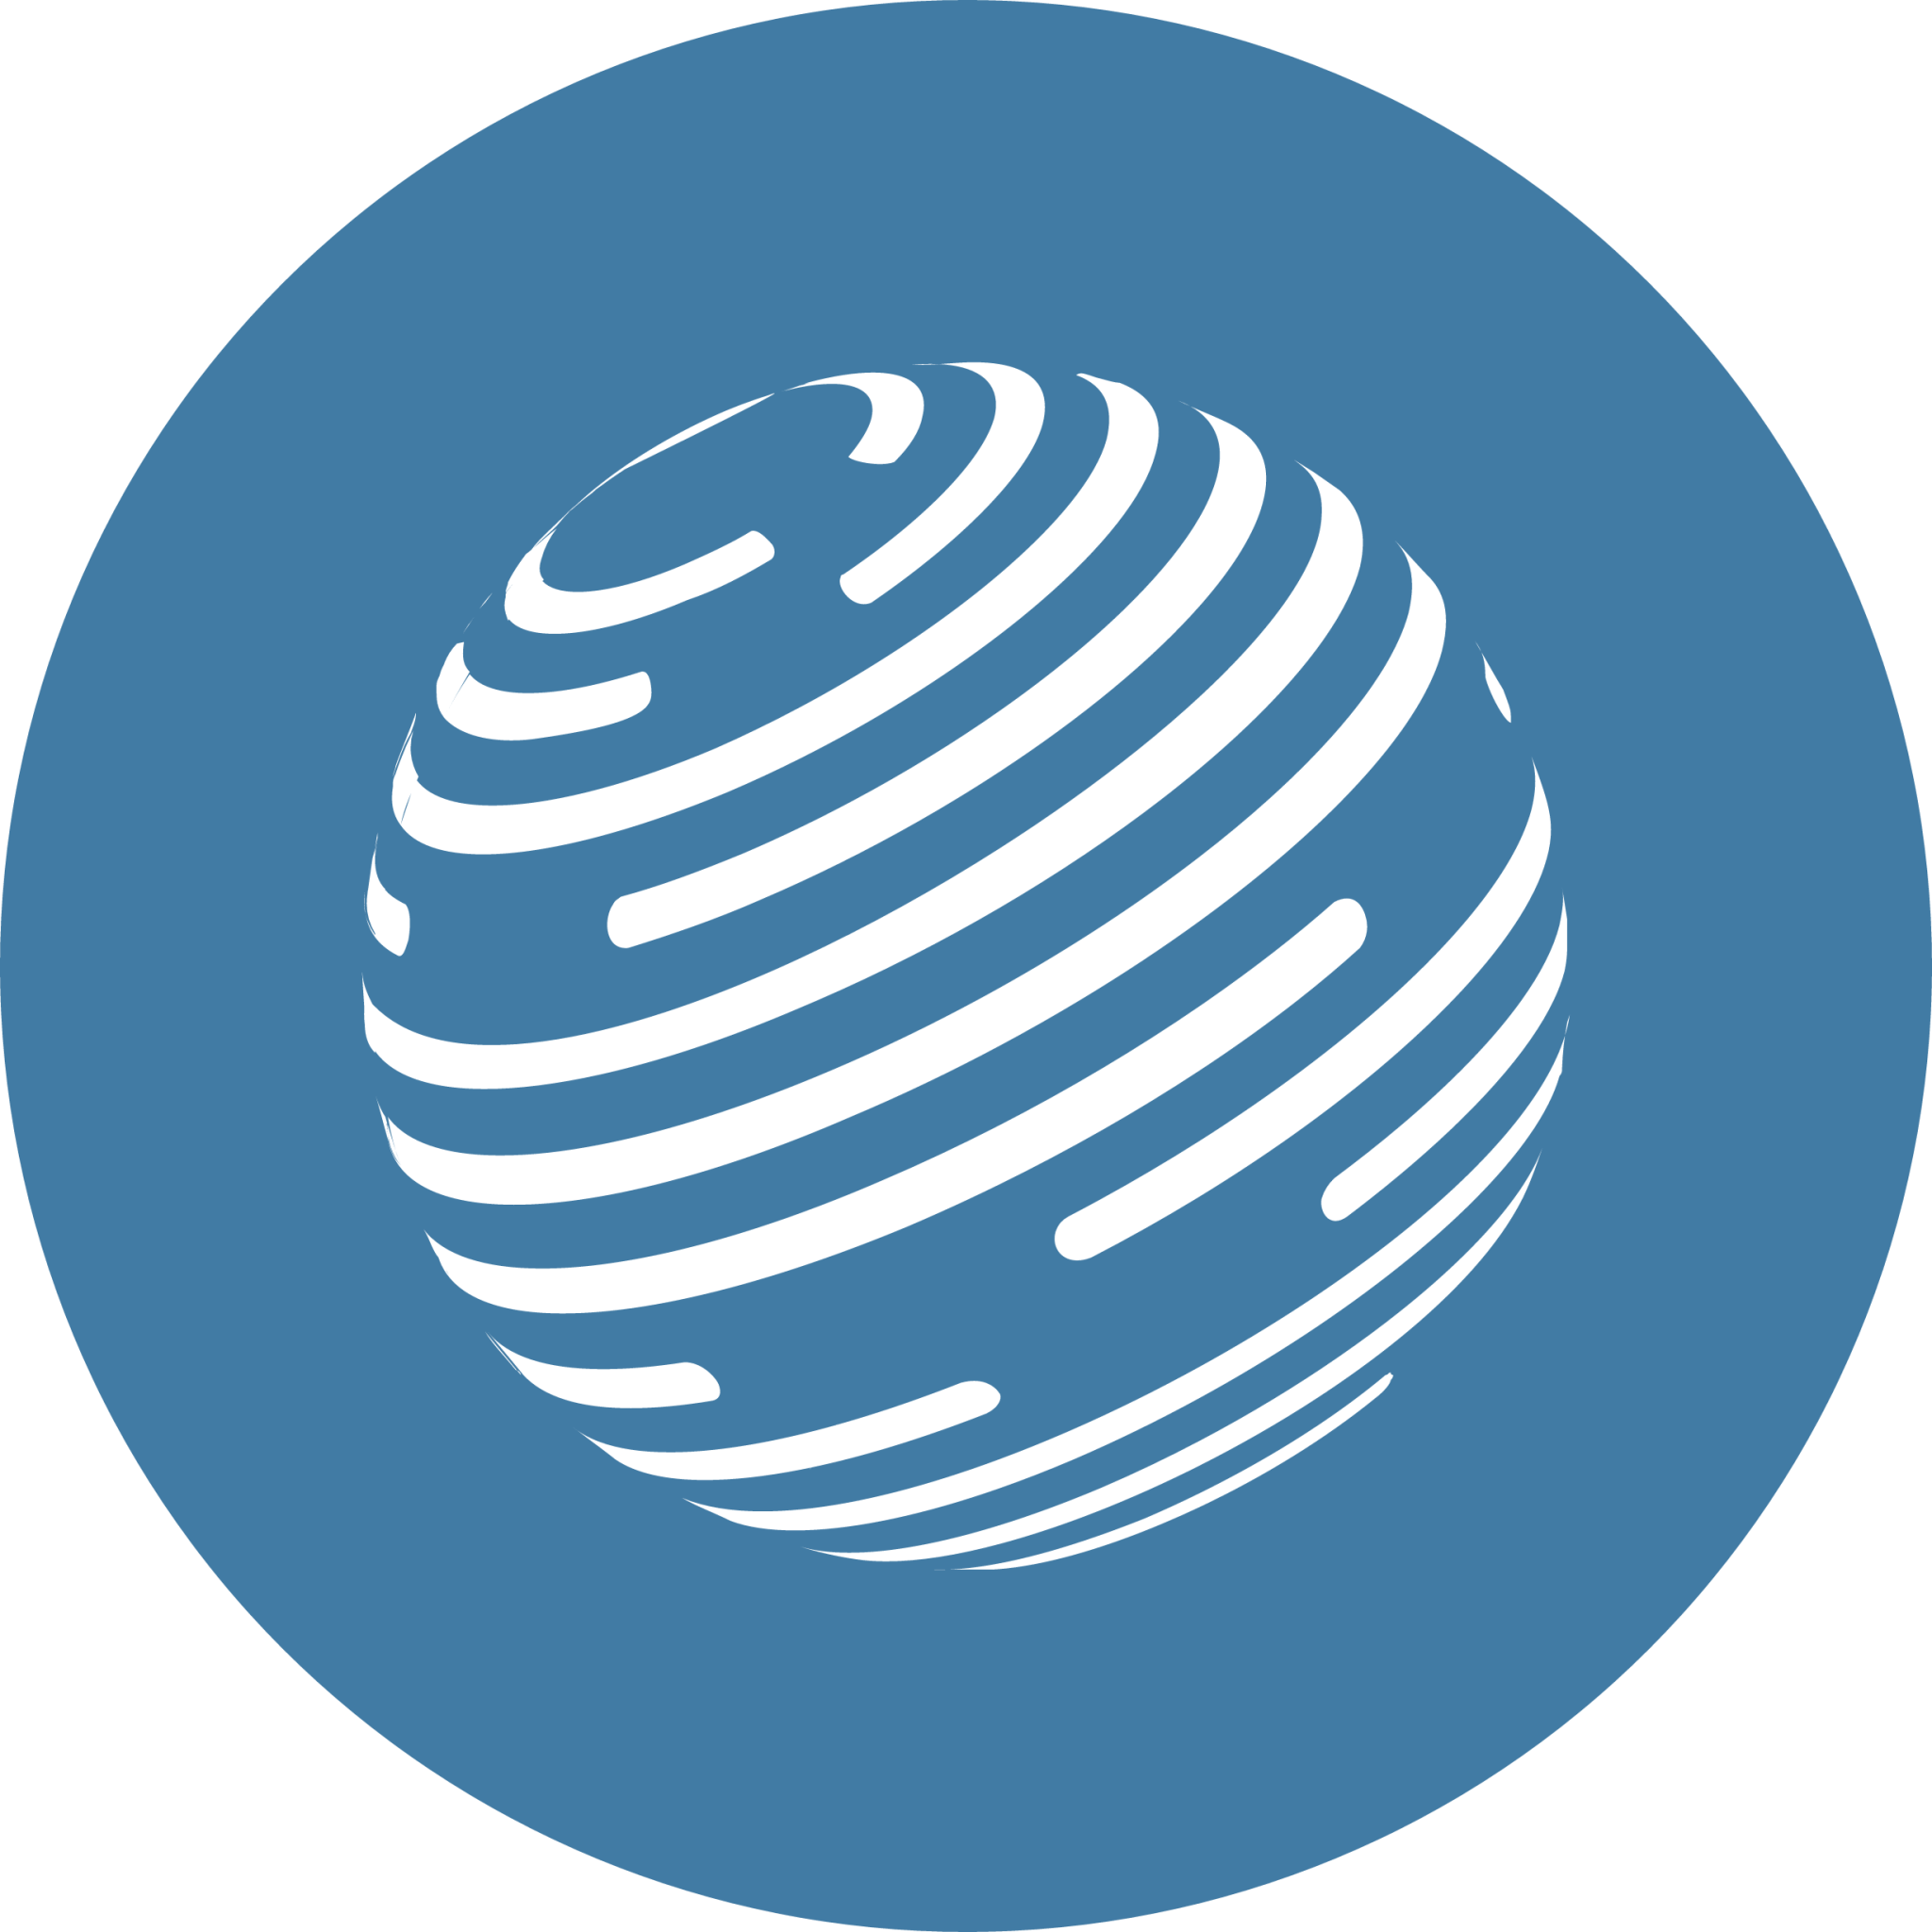 Factom Cryptocurrency icon